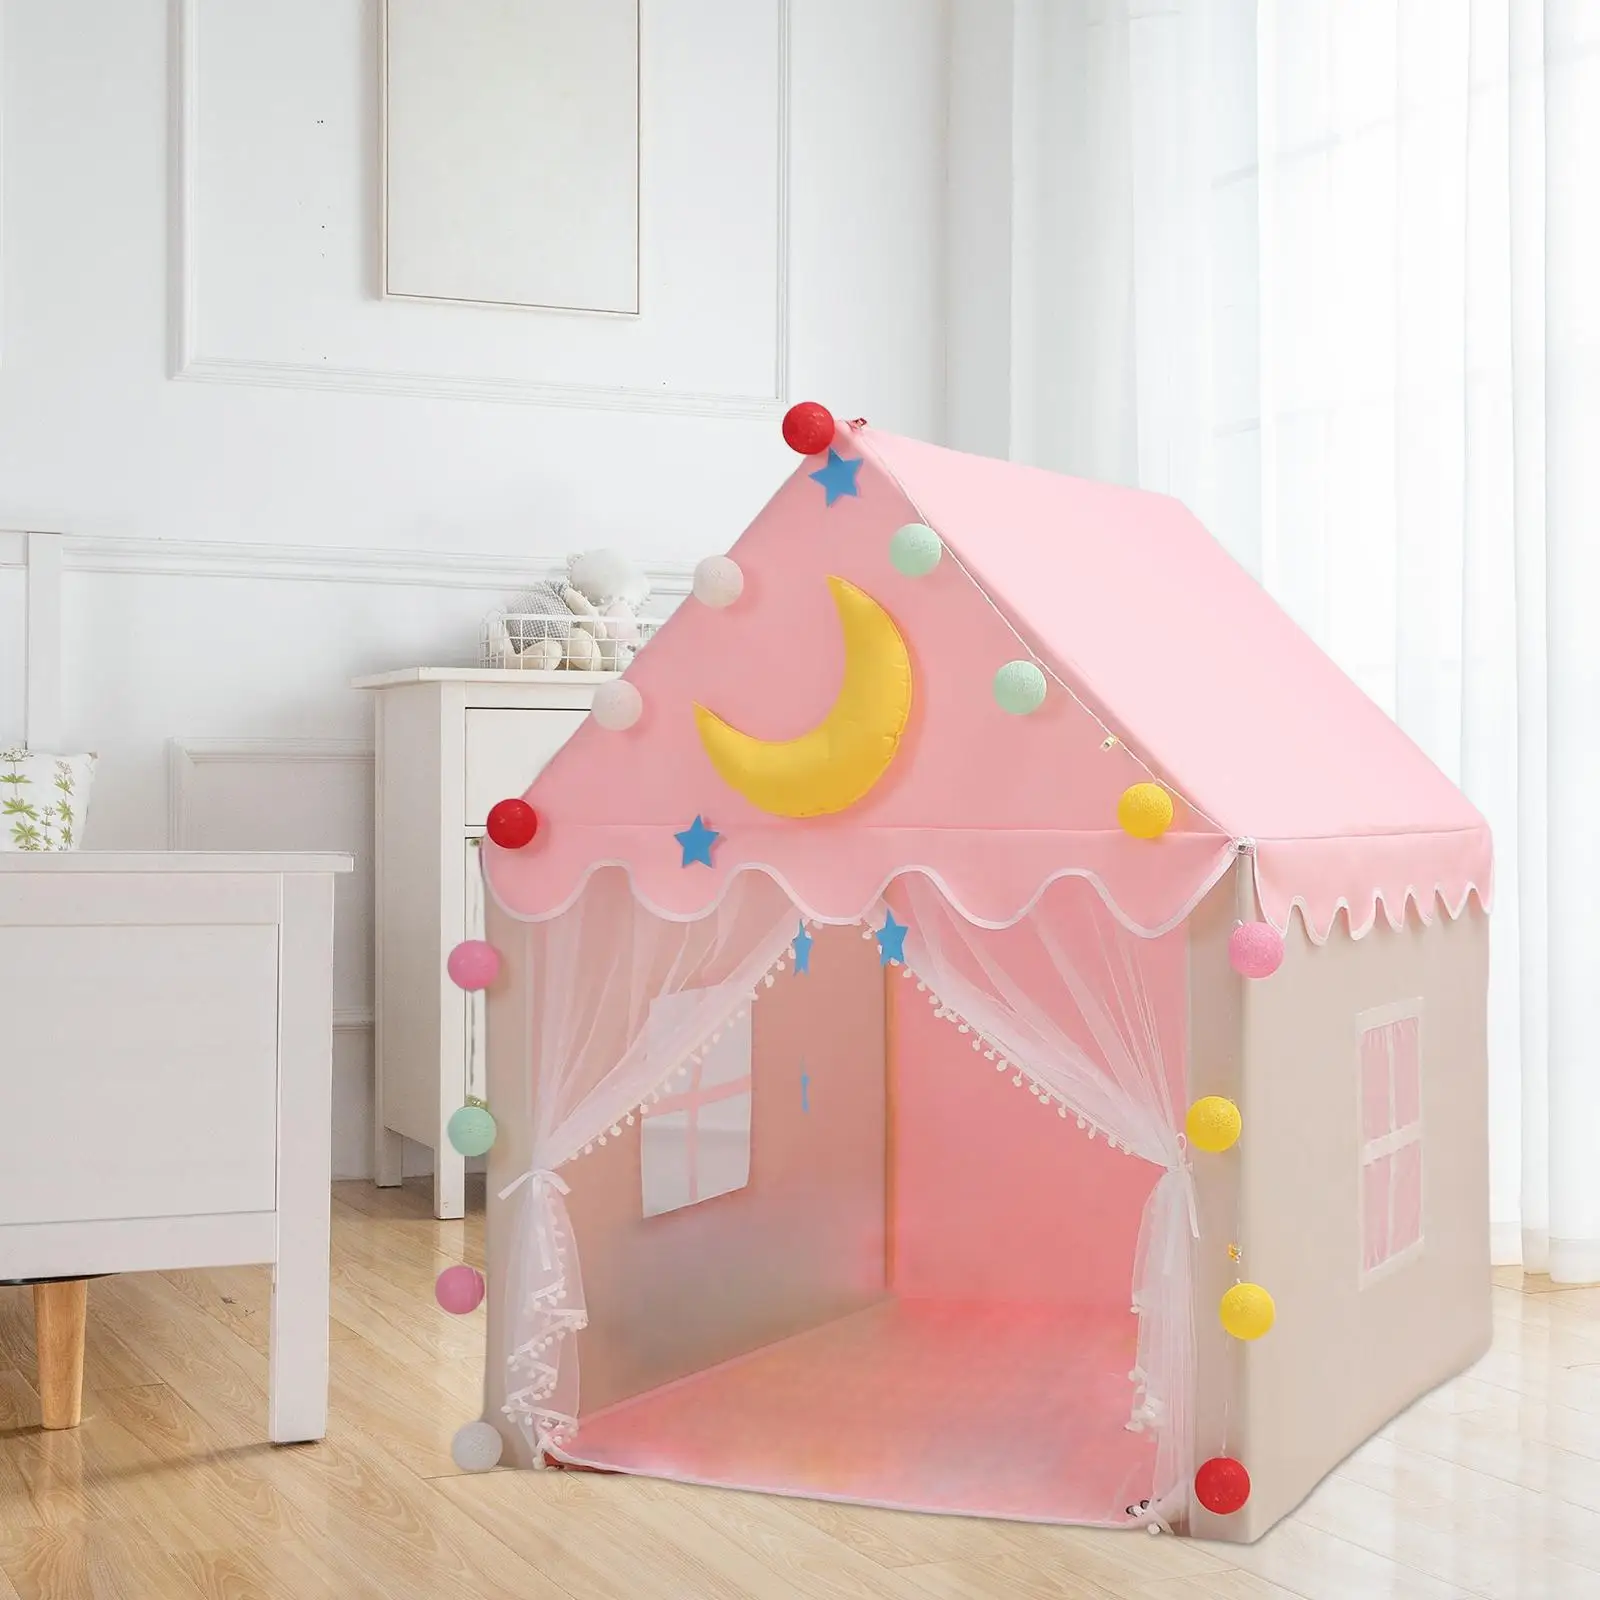 Kids Tent Play Tent Portable Playroom Indoor Outdoor Playhouse Play House for Kids Girls Toddlers Children Birhtday Gift